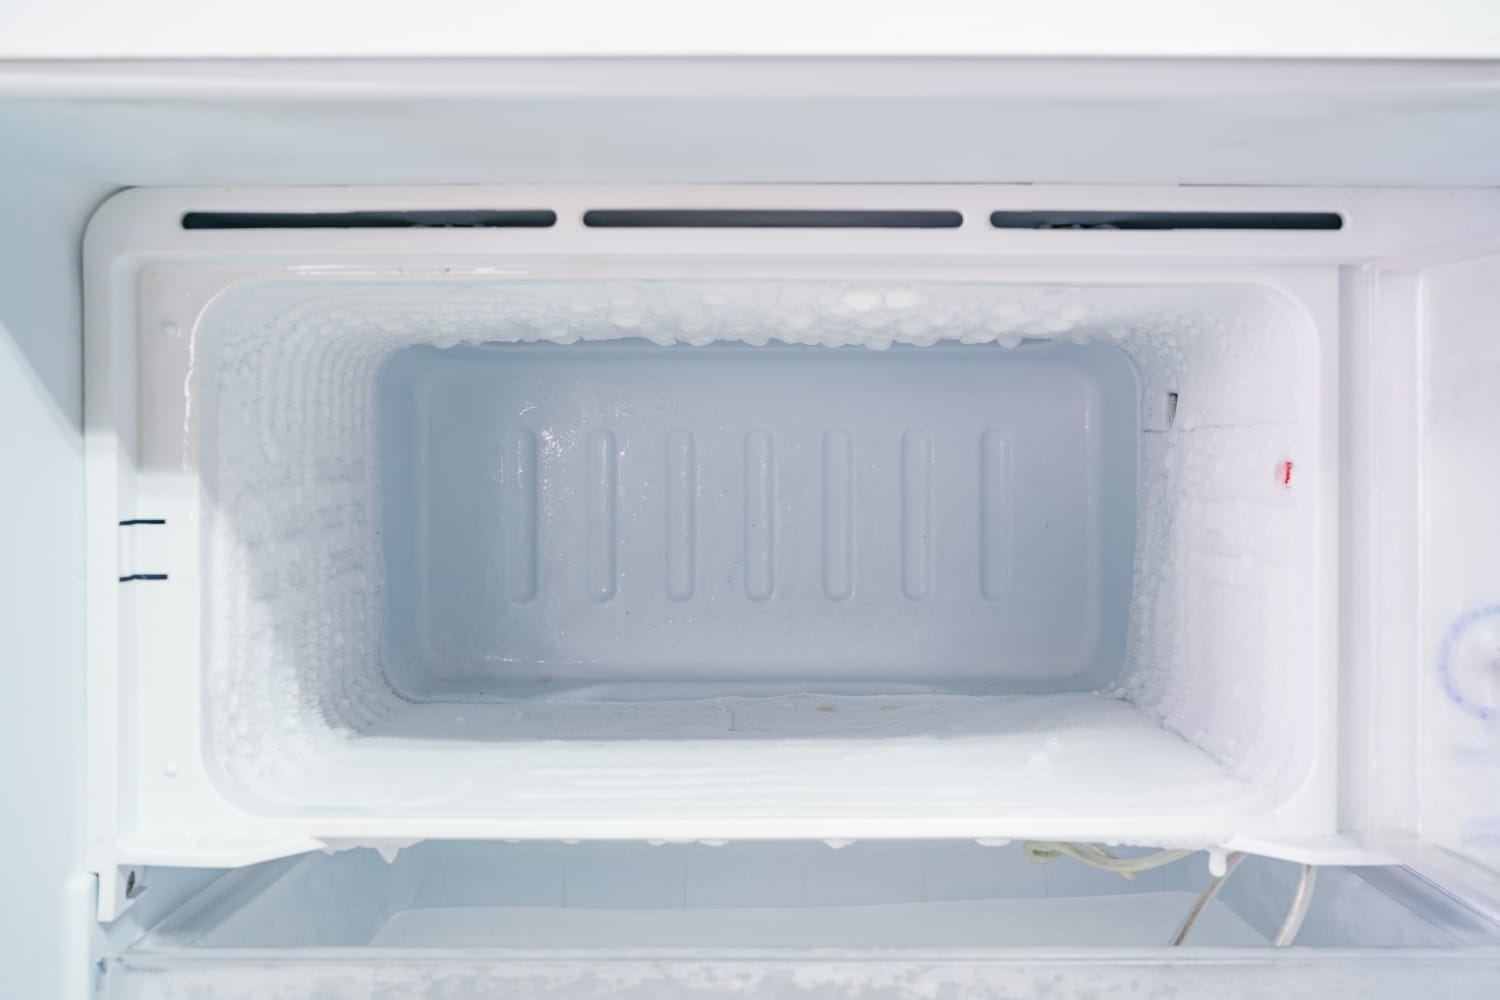 The Problem with Frost-free Freezers.